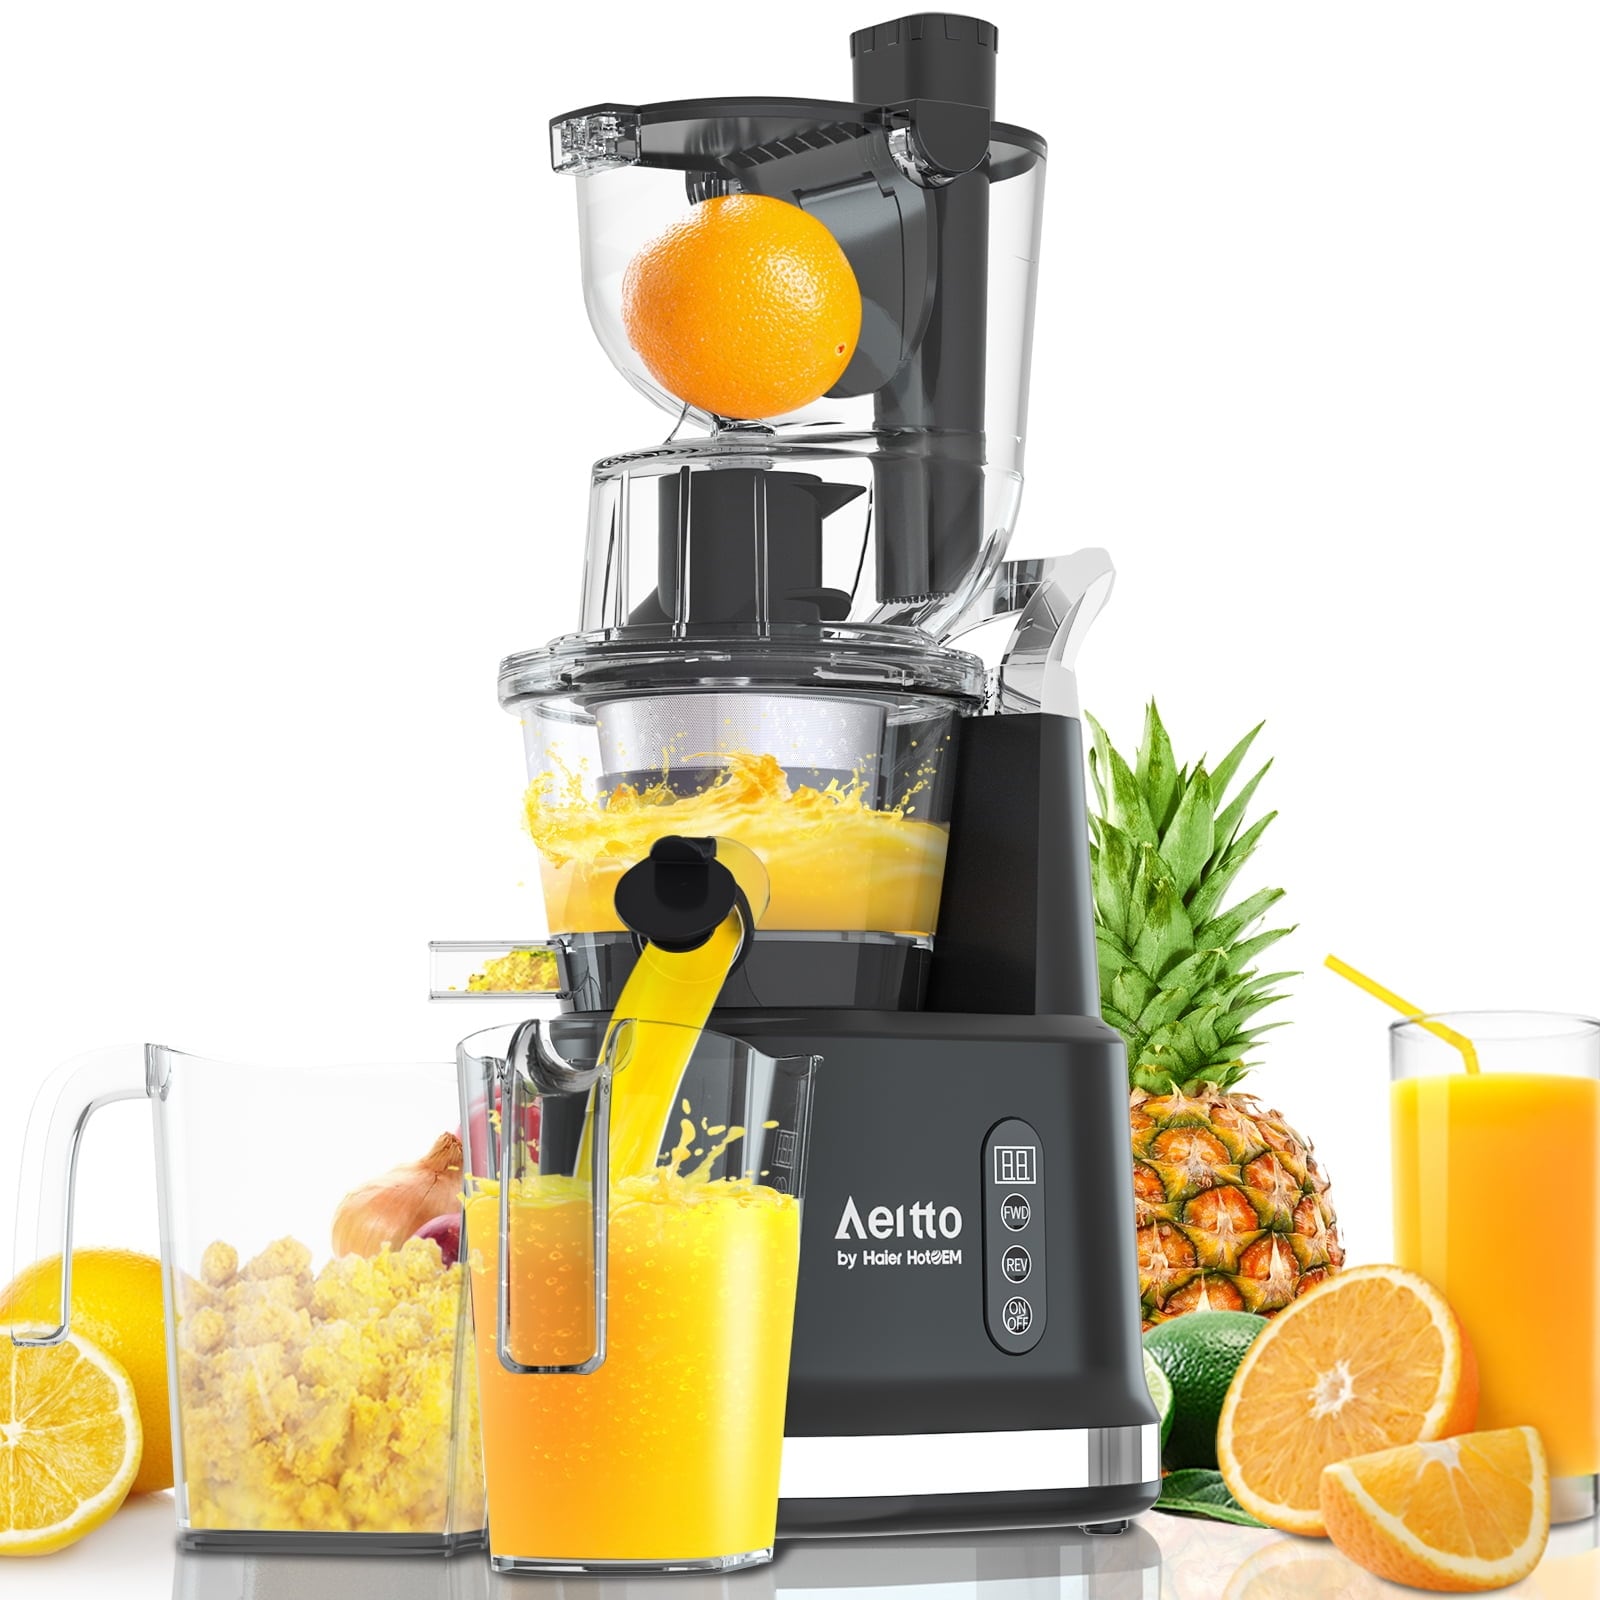 Juicer Machines, Aeitto® Slow juicer,Big Wide 3.2-inch Chute, Cold Press Masticating juicer